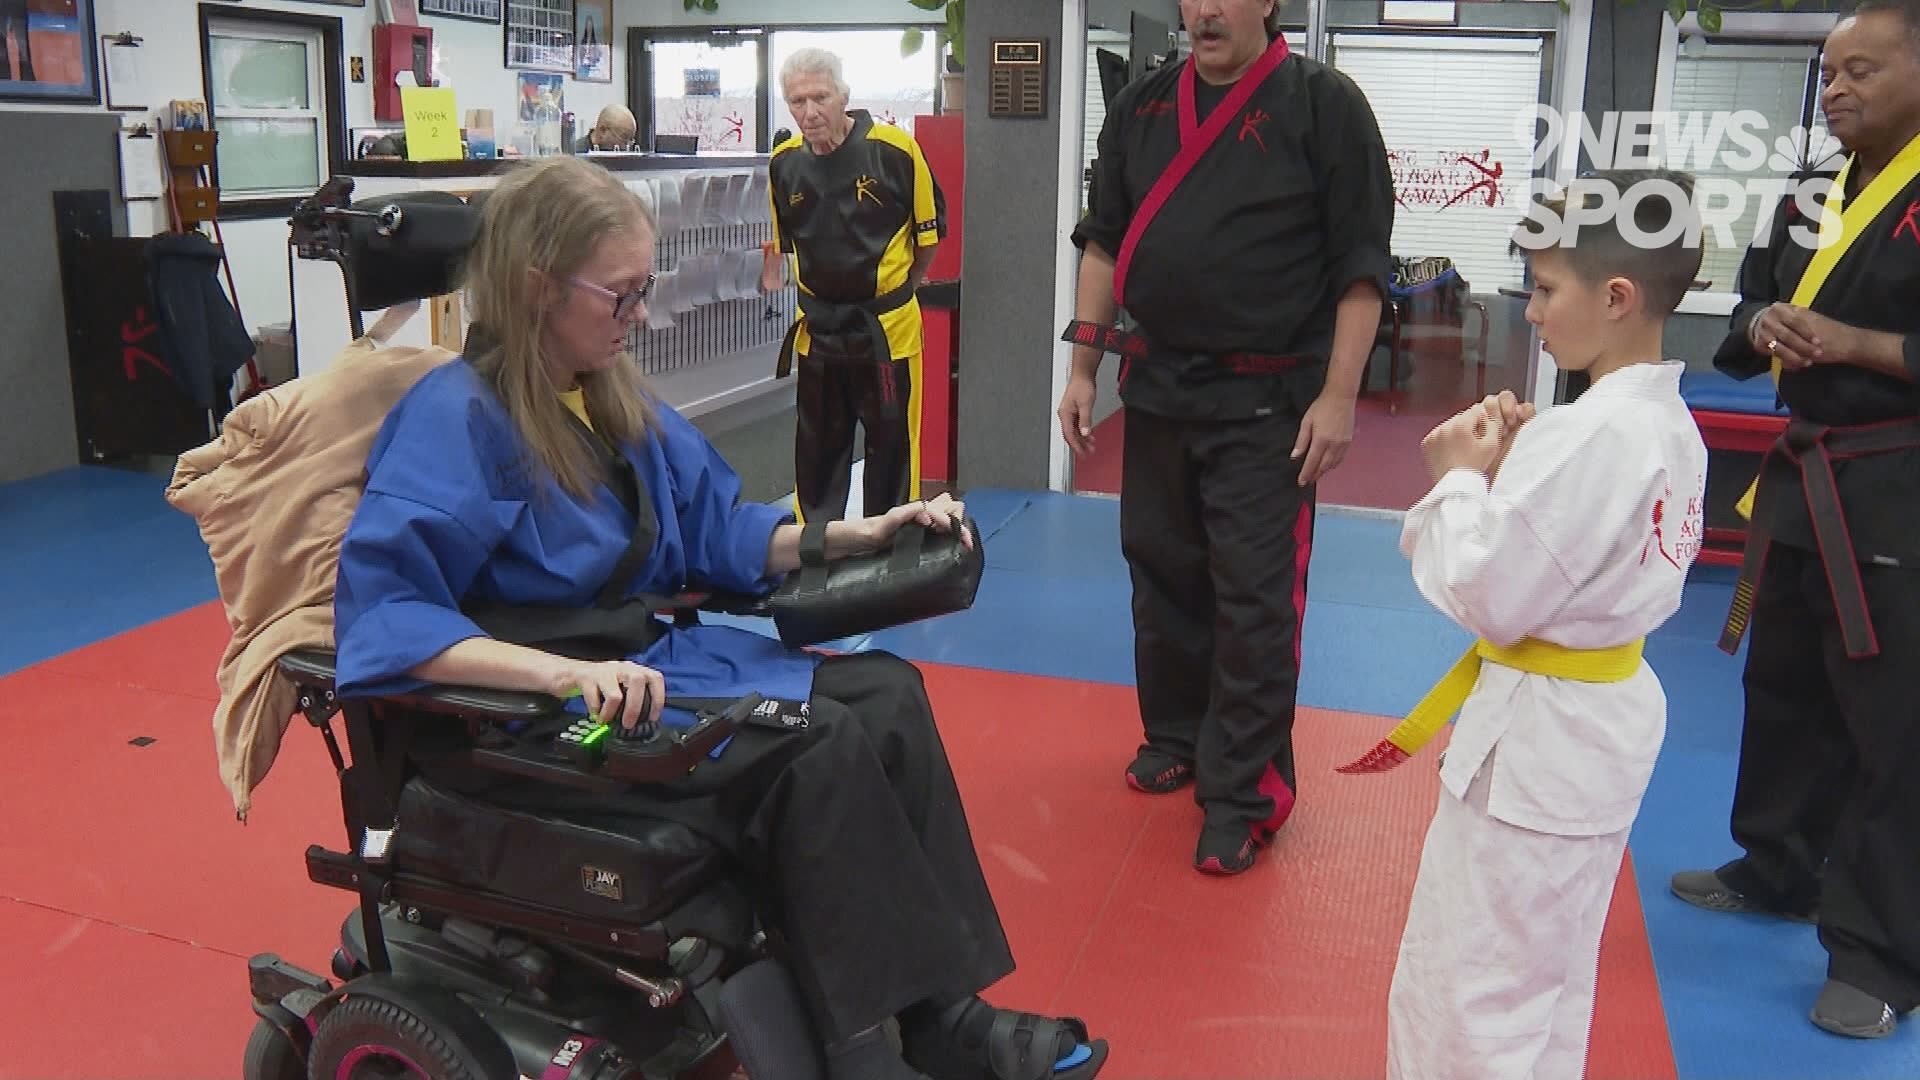 Anita Liuzzi broke barriers by becoming the first person in a wheelchair to earn a black belt at 5280 Karate Academy in Lakewood.